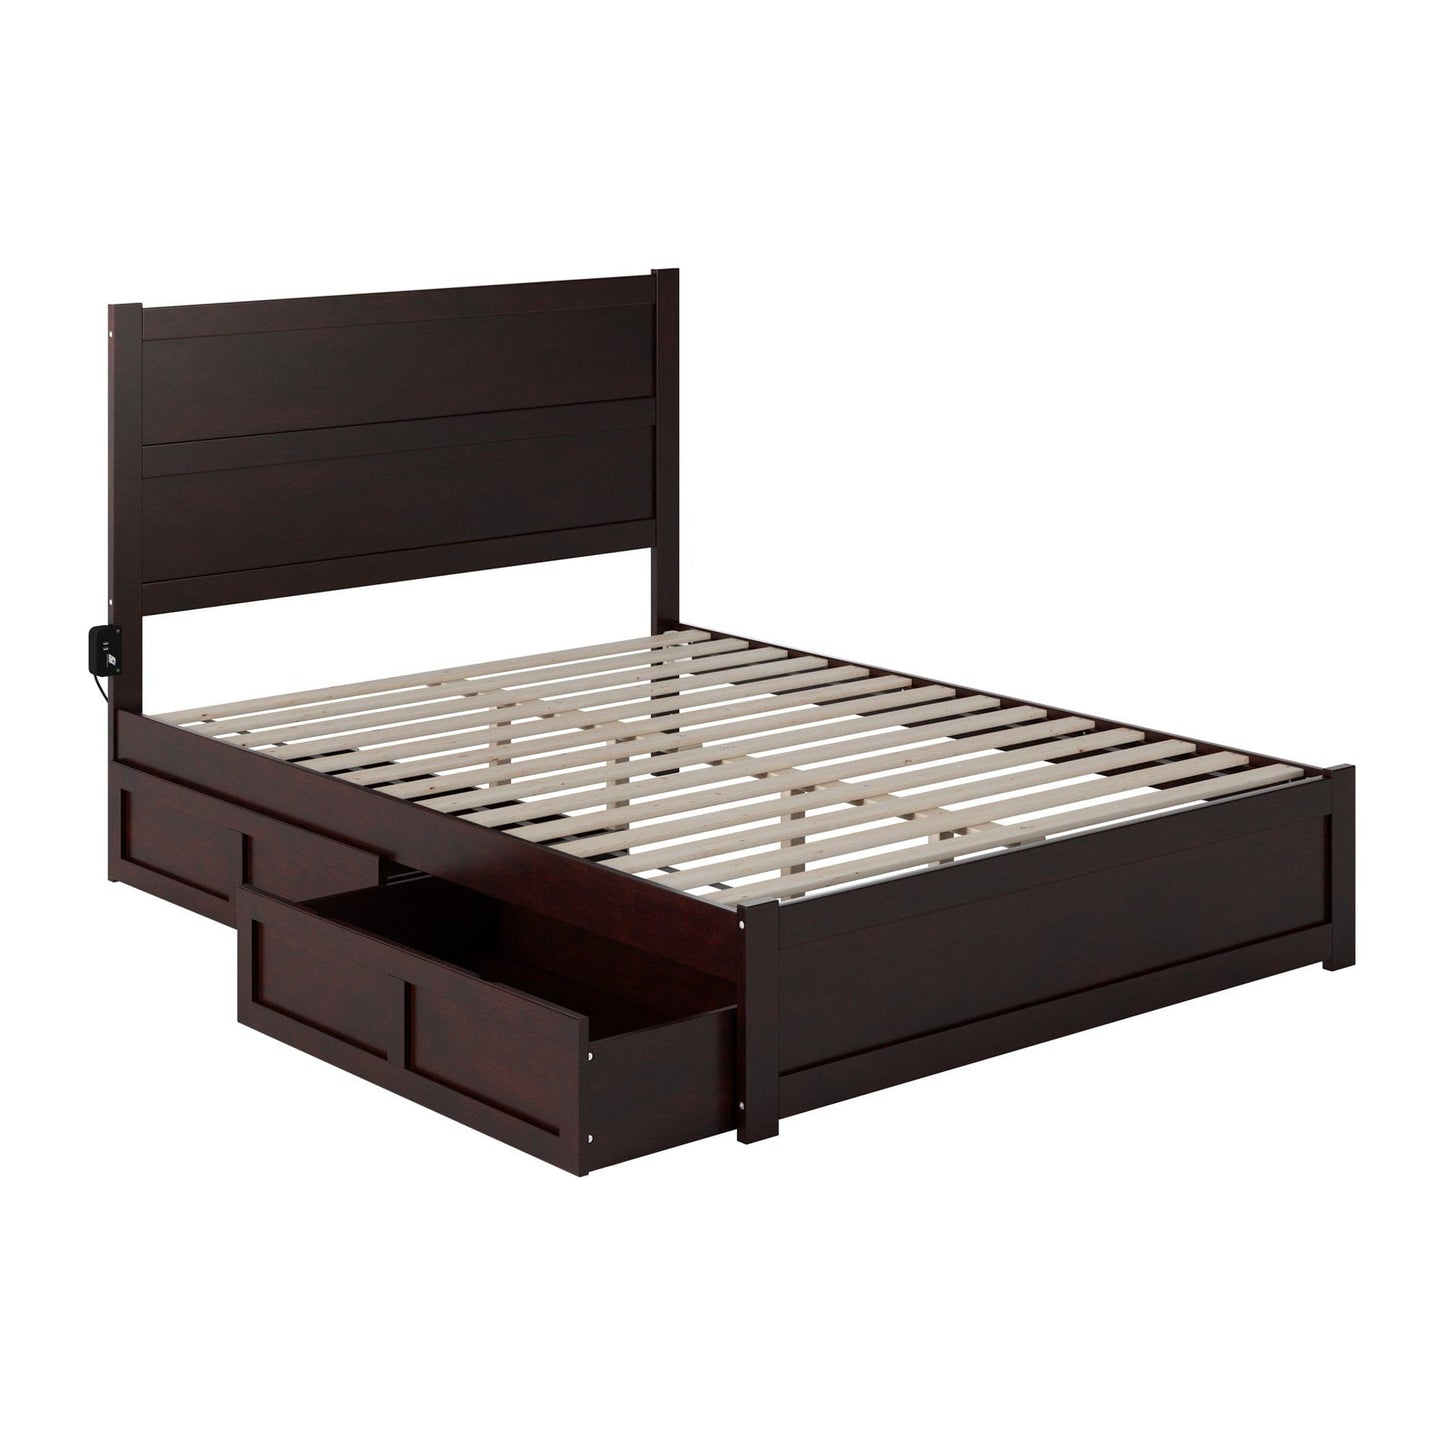 AFI Furnishings NoHo Queen Bed with Footboard and 2 Drawers in Espresso